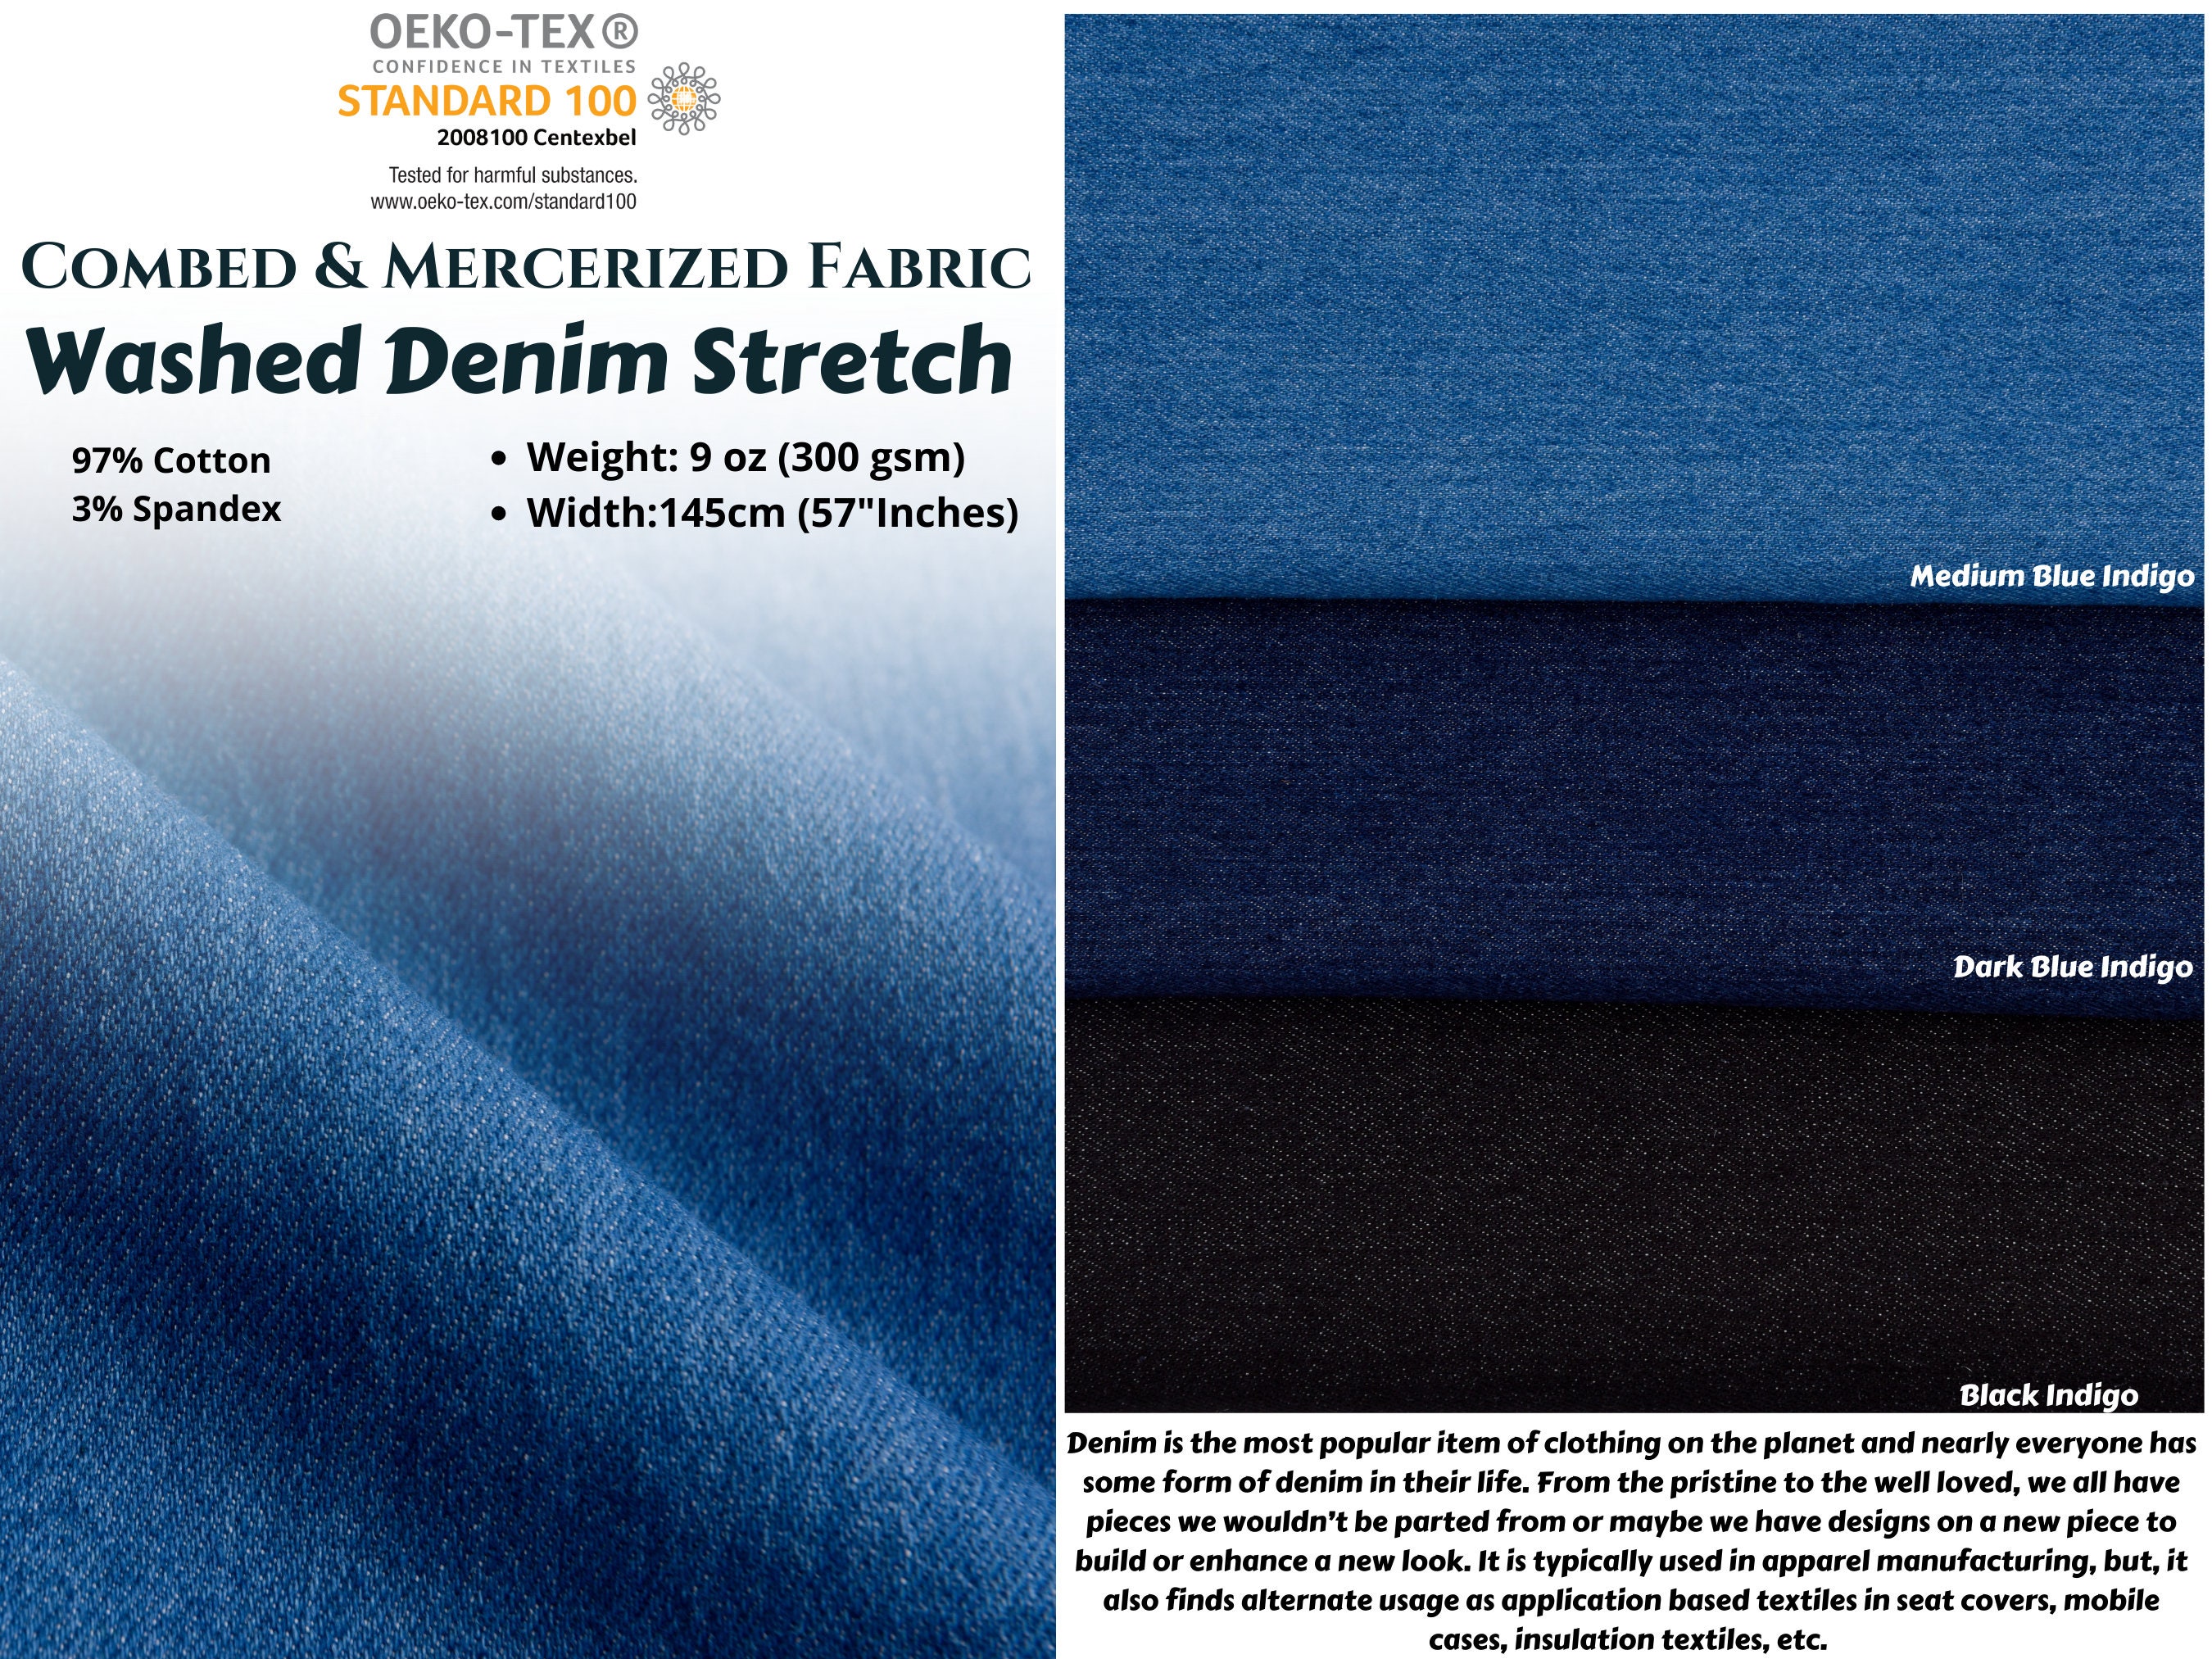 Denim fabric : (Characteristics and different types) - SewGuide